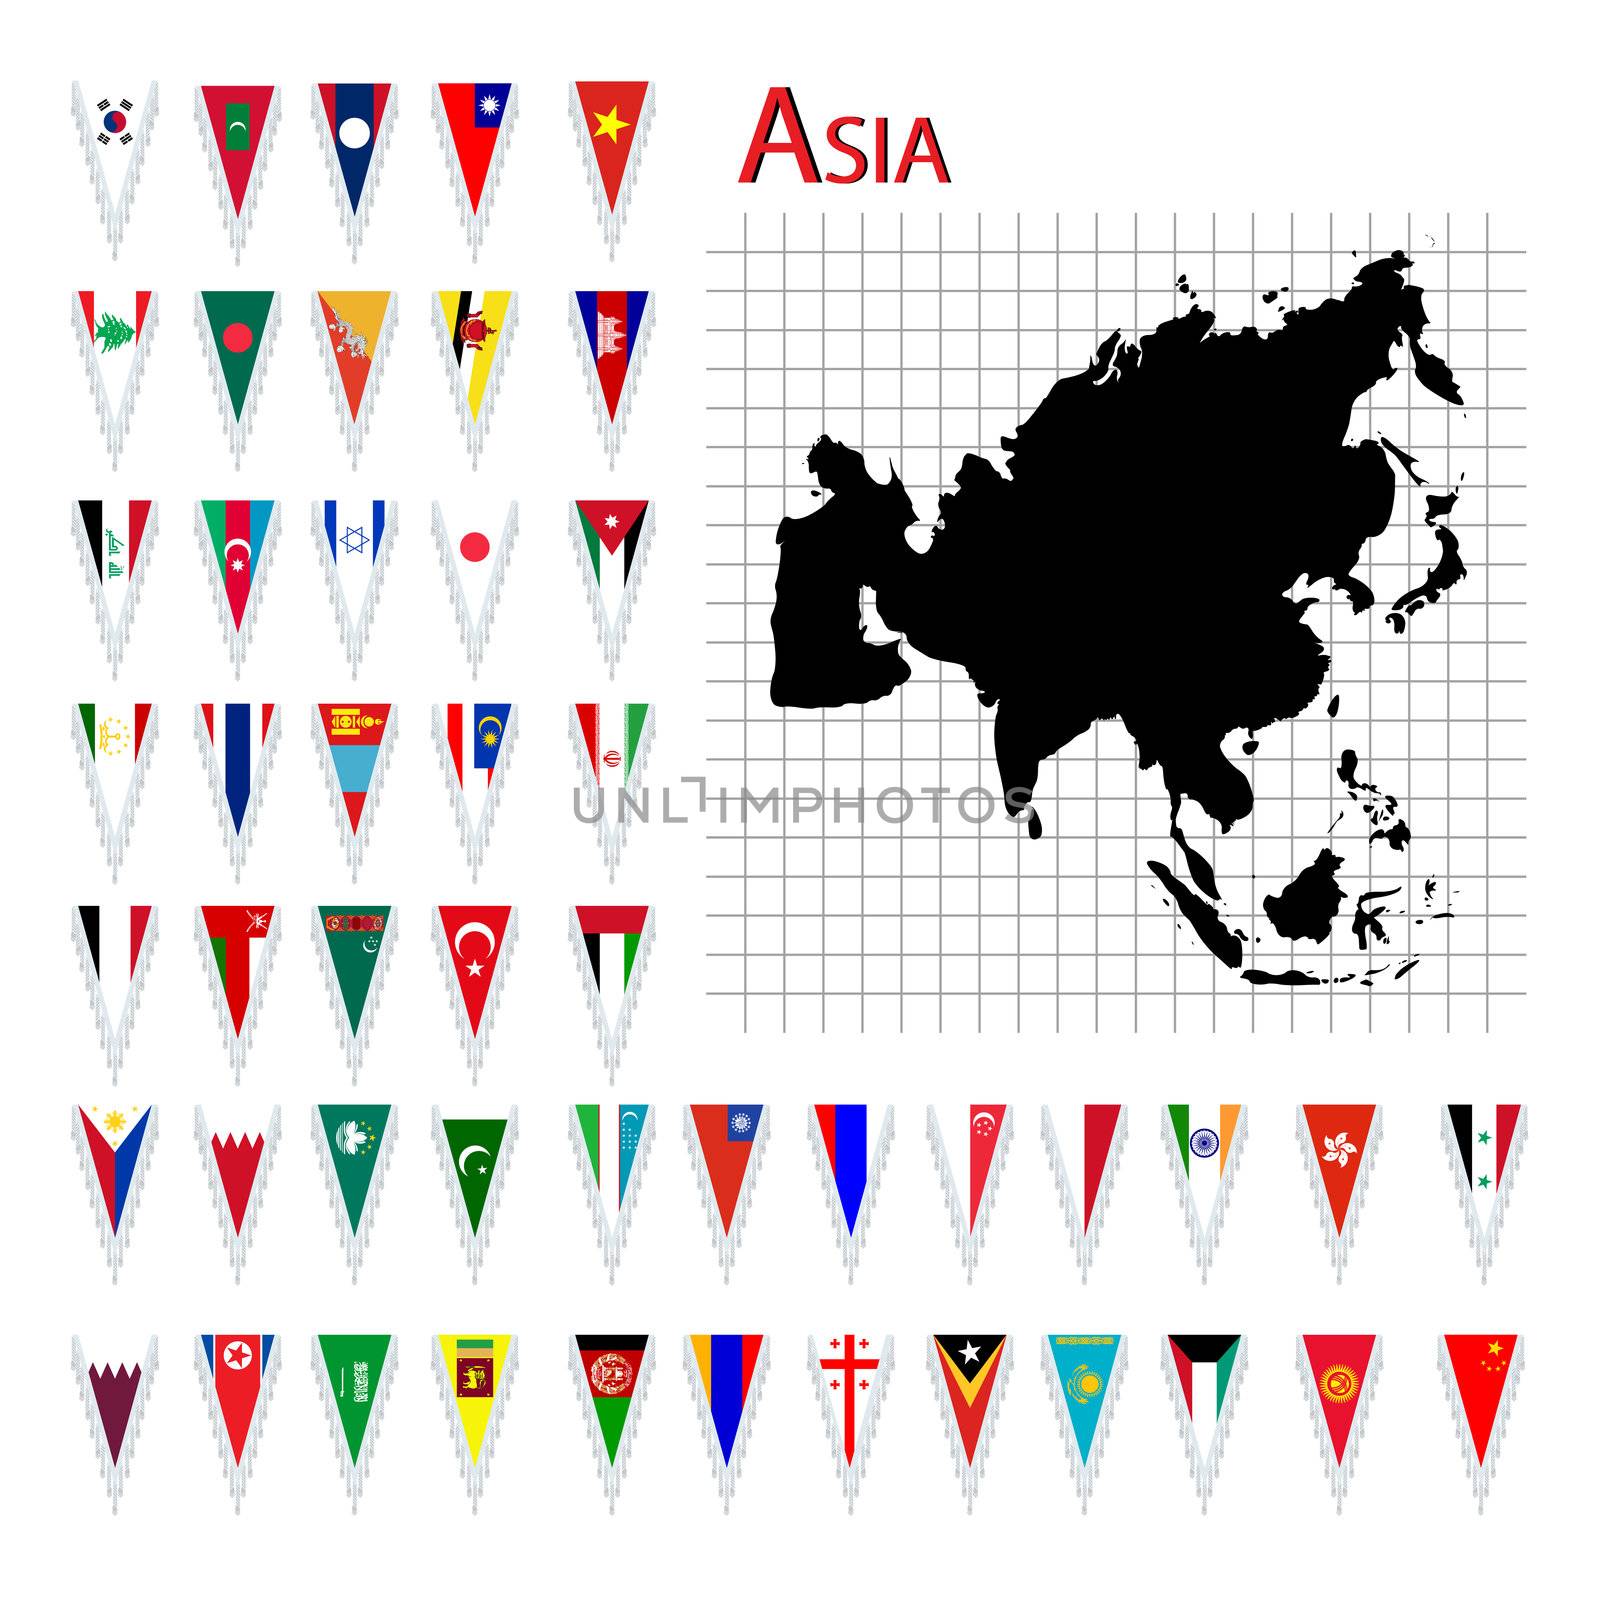 Flags of Asia by catacos